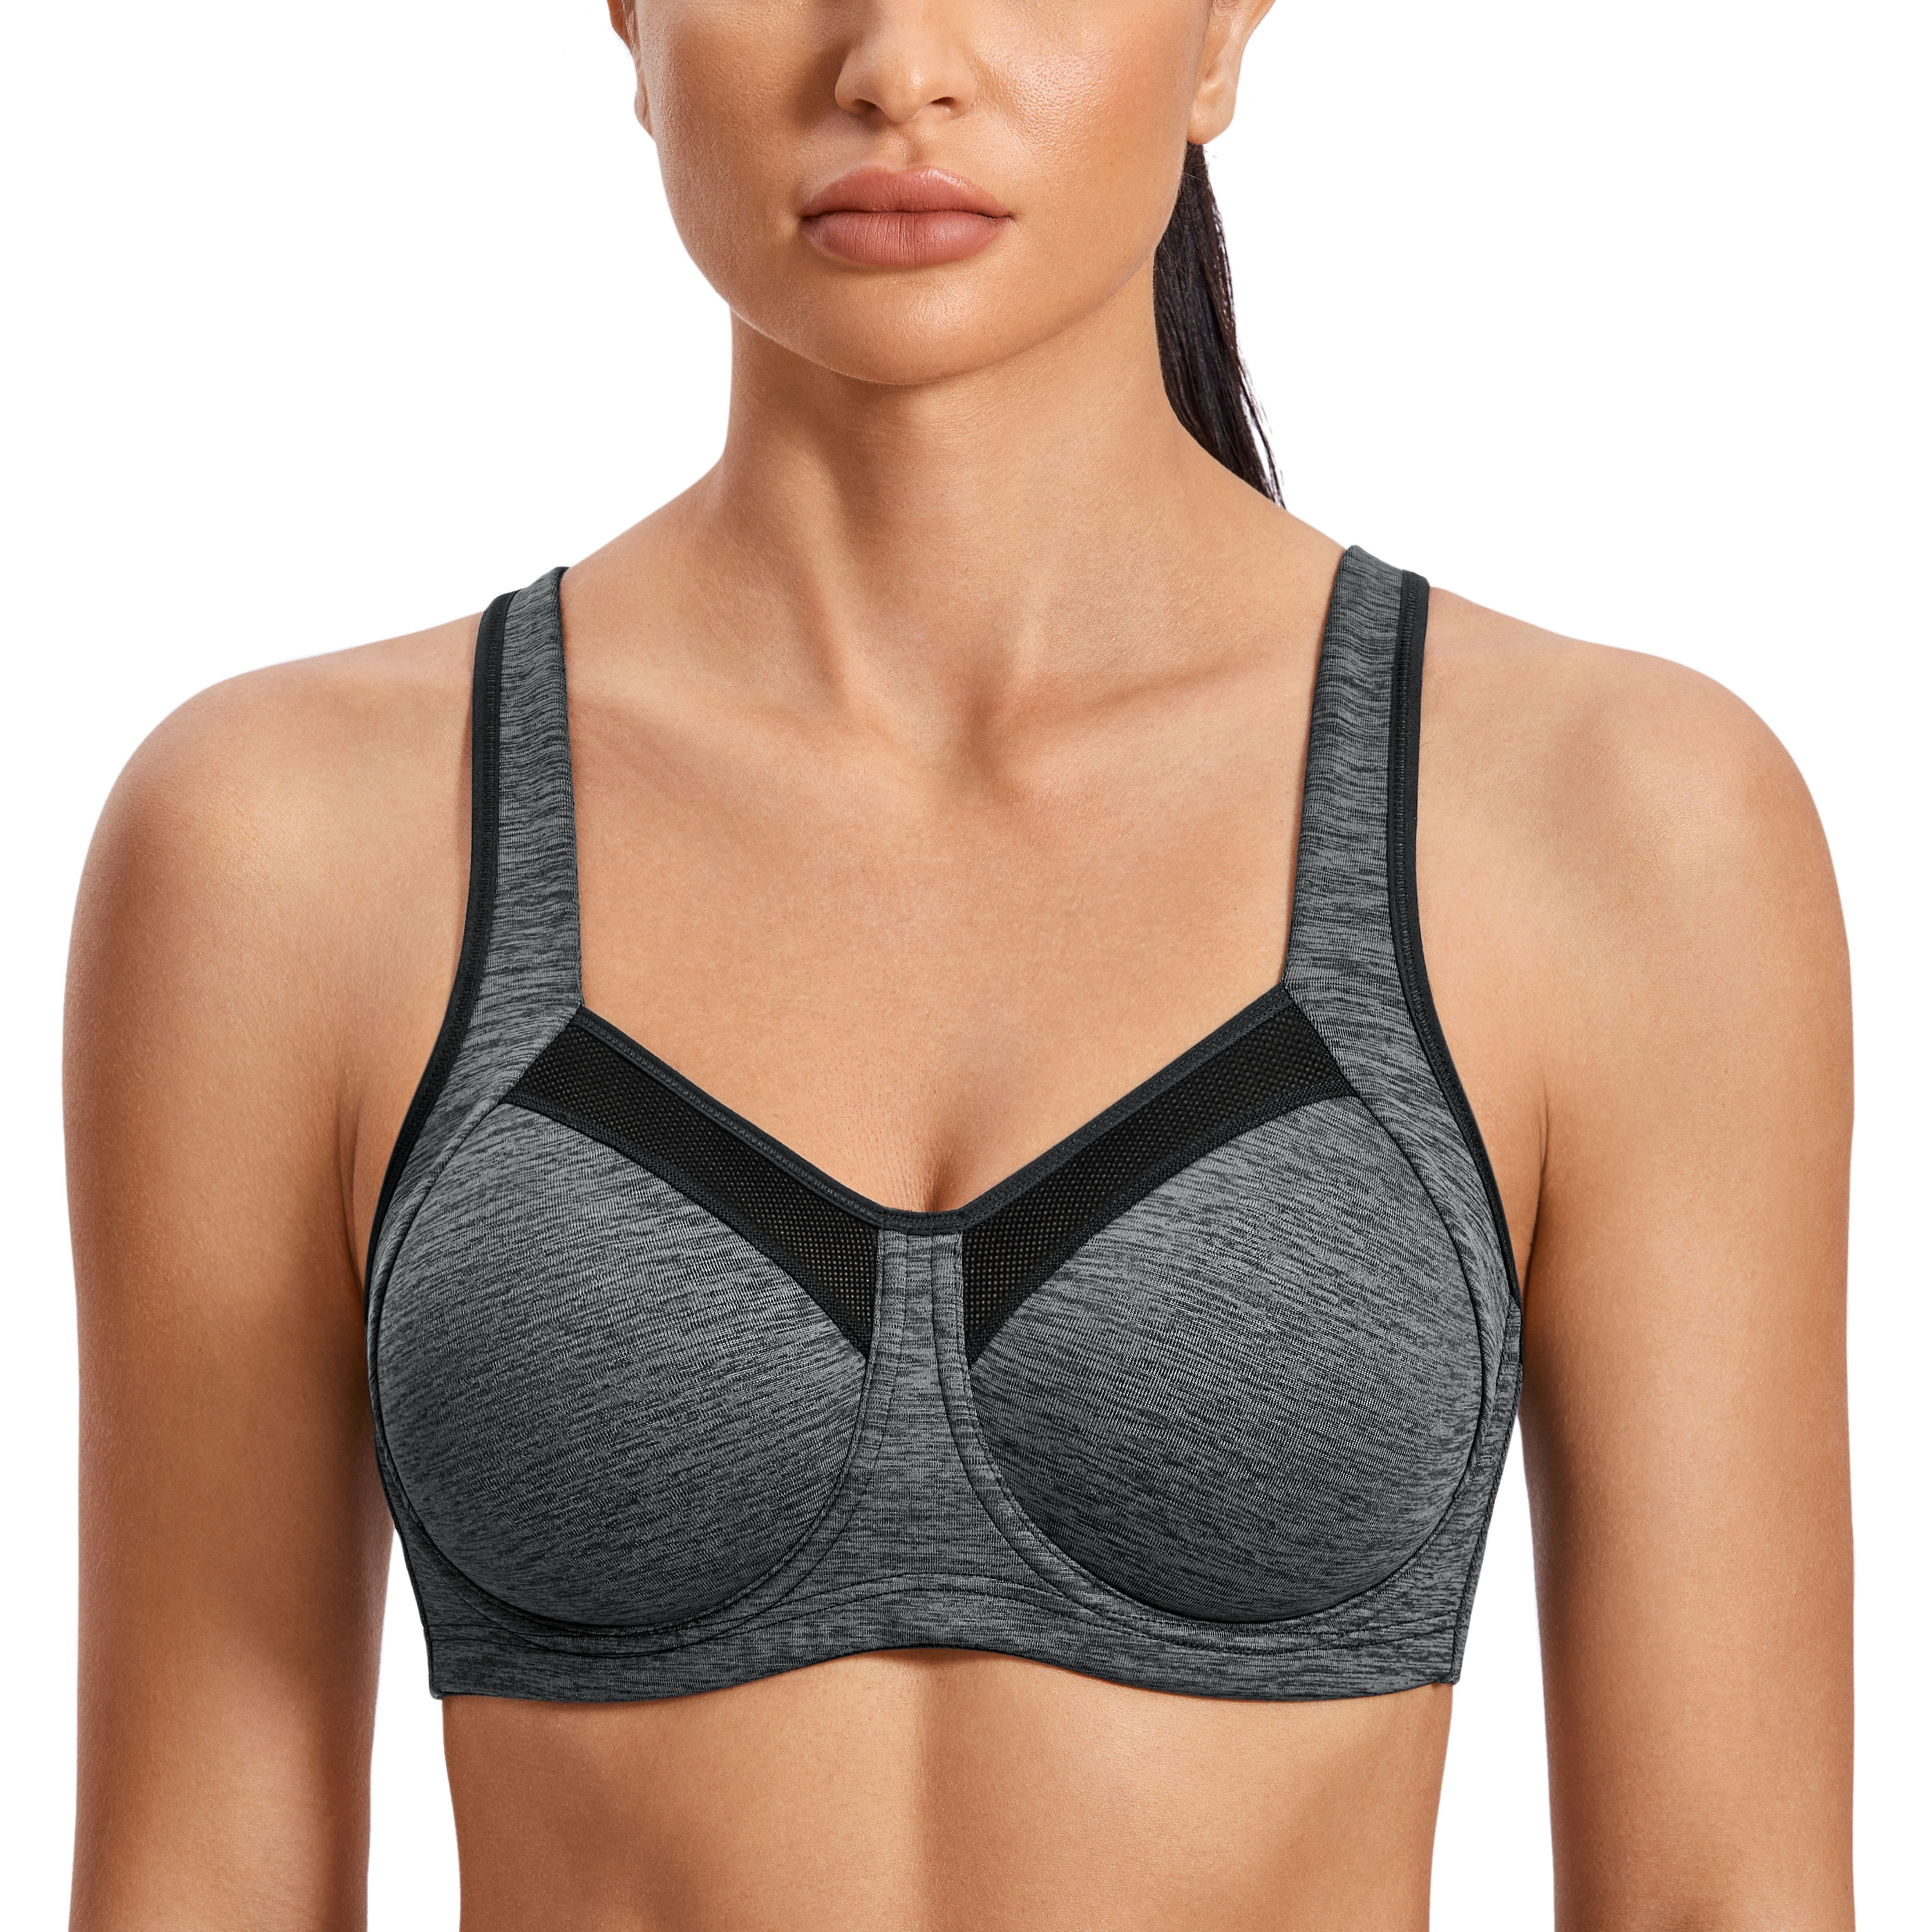 SYROKAN High Impact Sports Bras for Women Underwire High Support